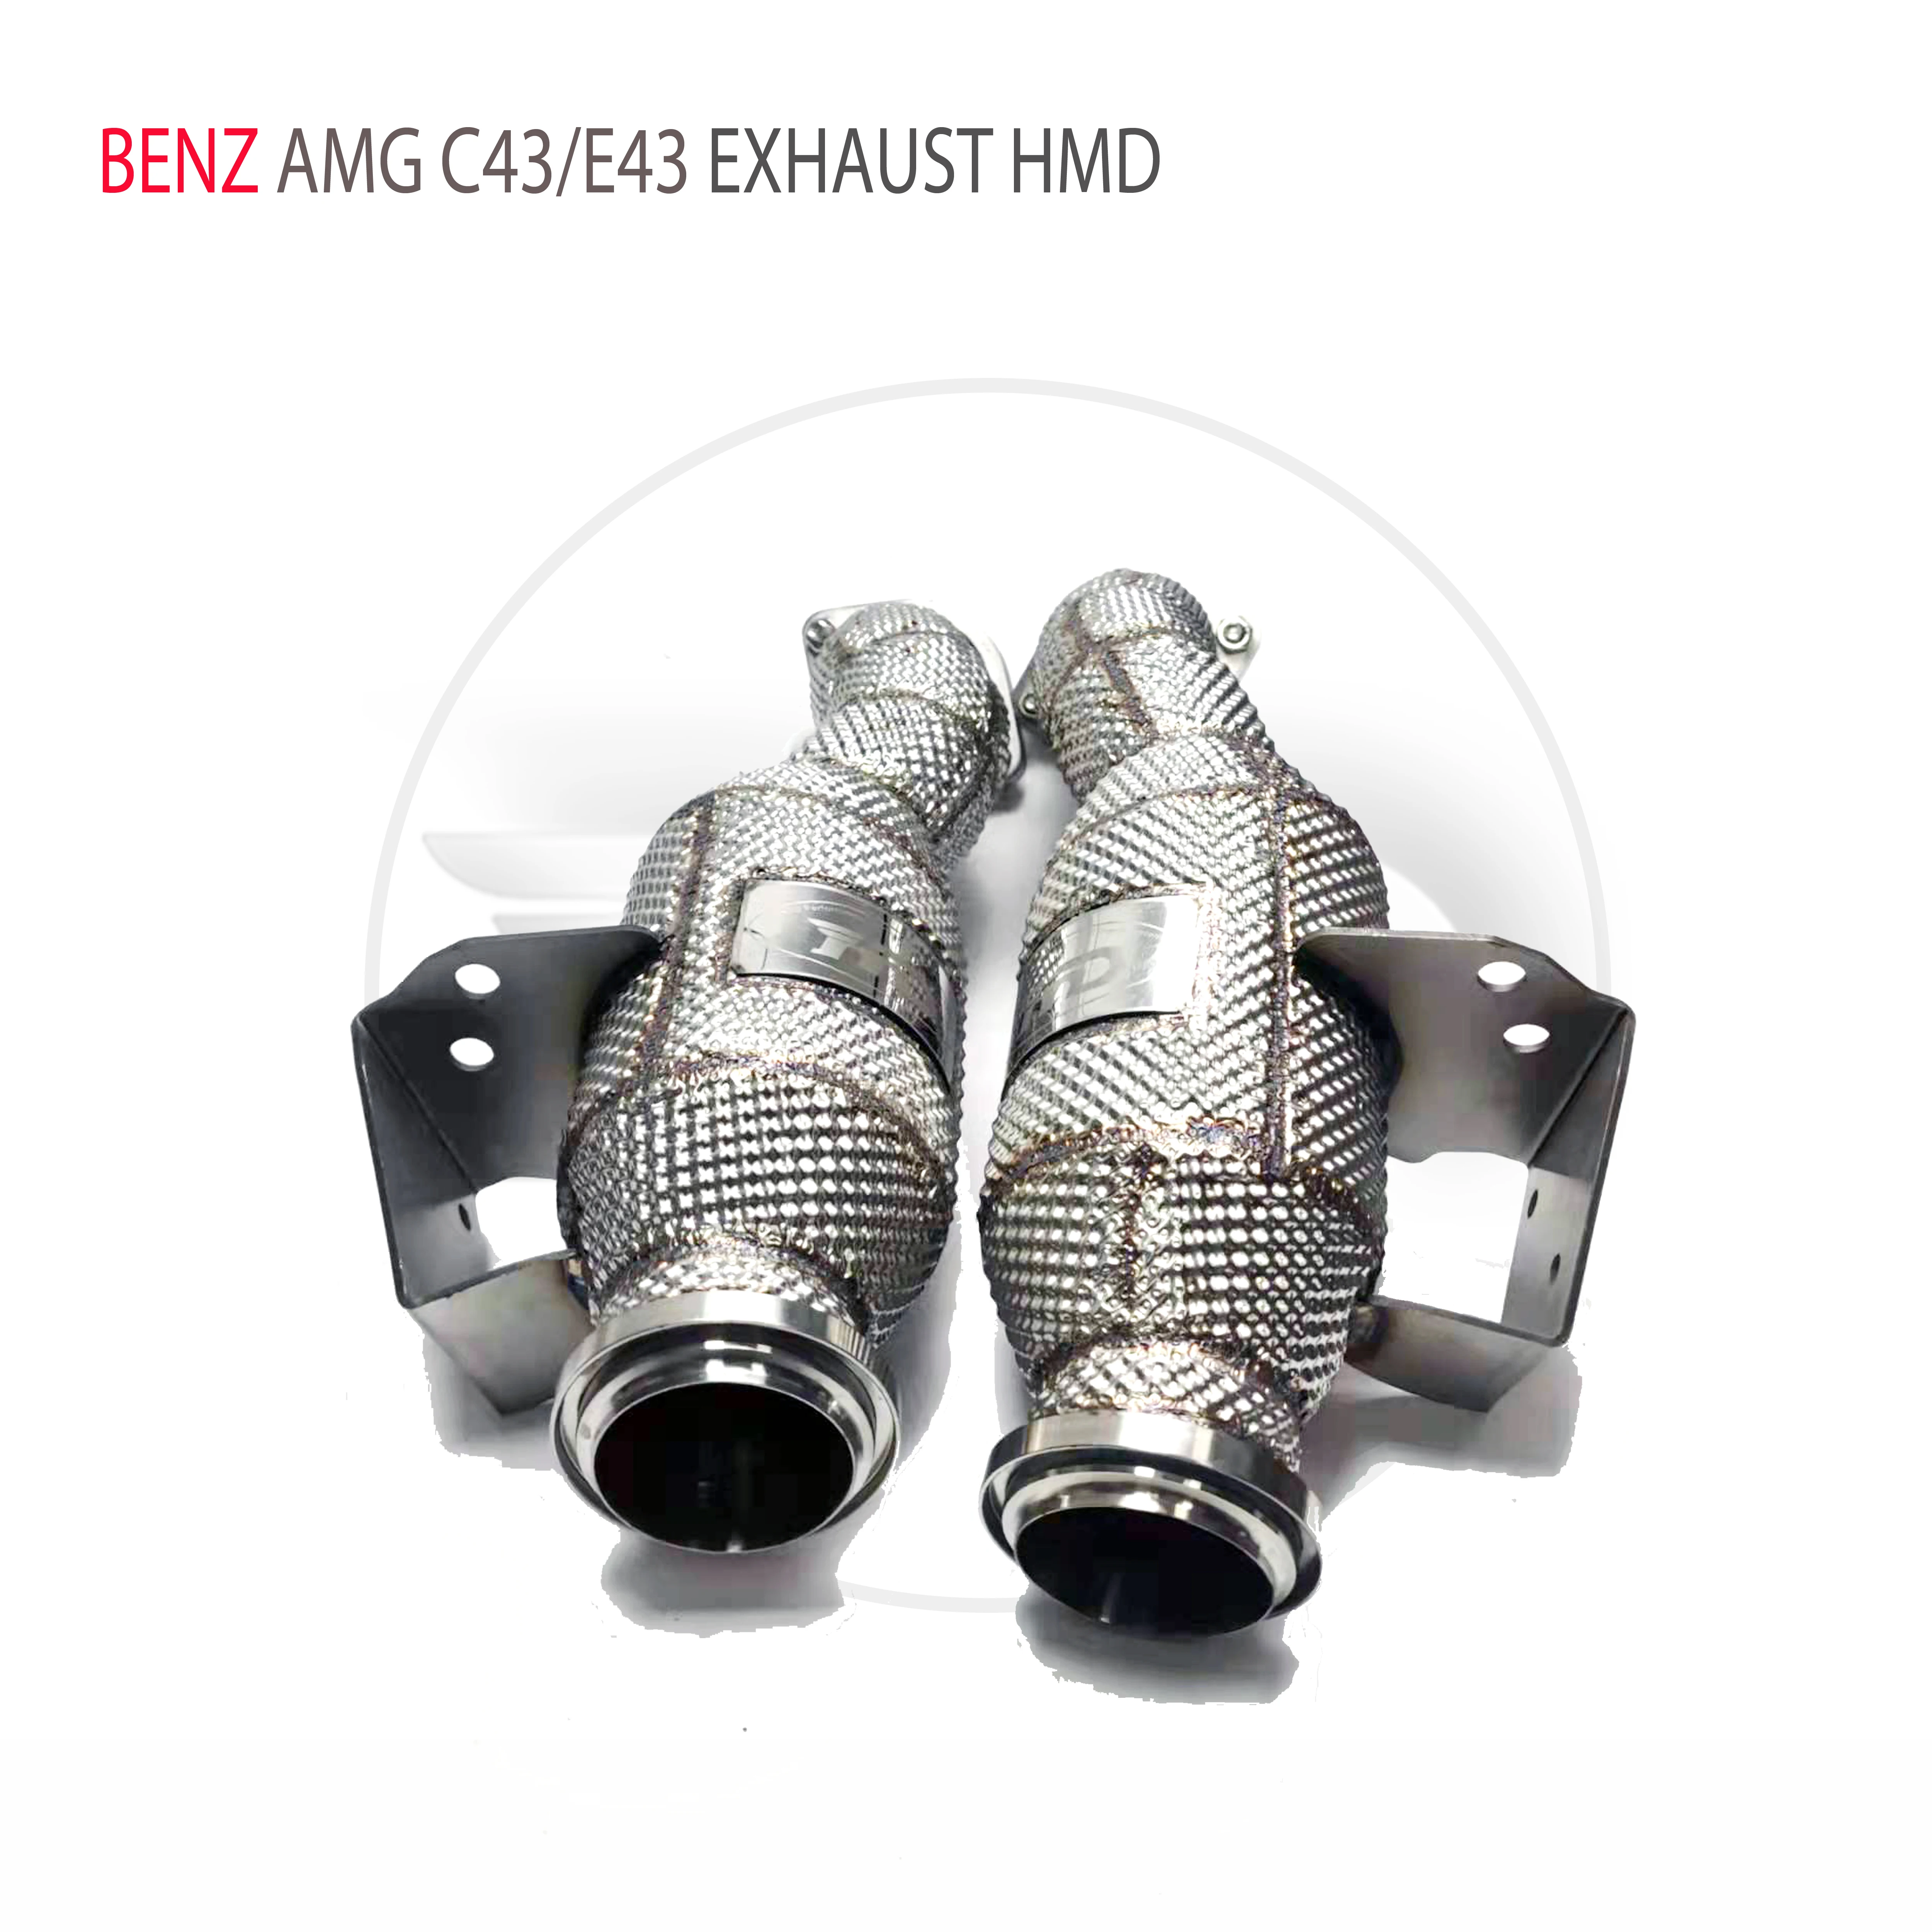 

HMD Exhaust Manifold Downpipe for Benz AMG C43 E43 Car Accessories With Catalytic Converter Header Without Cat Pipe